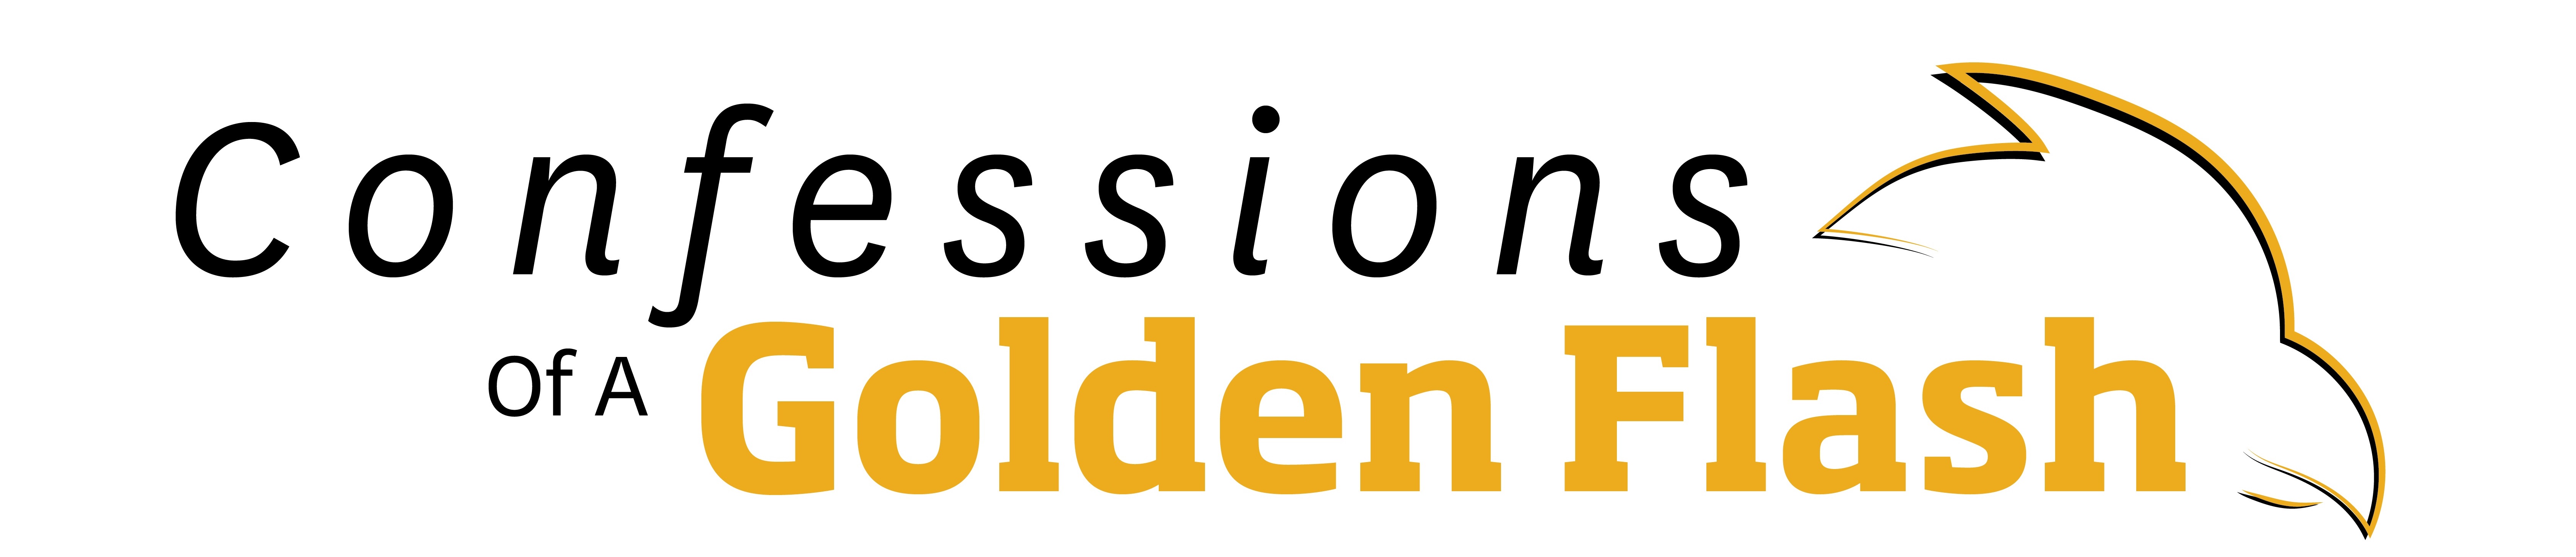 Confessions of a Golden Flash Banner